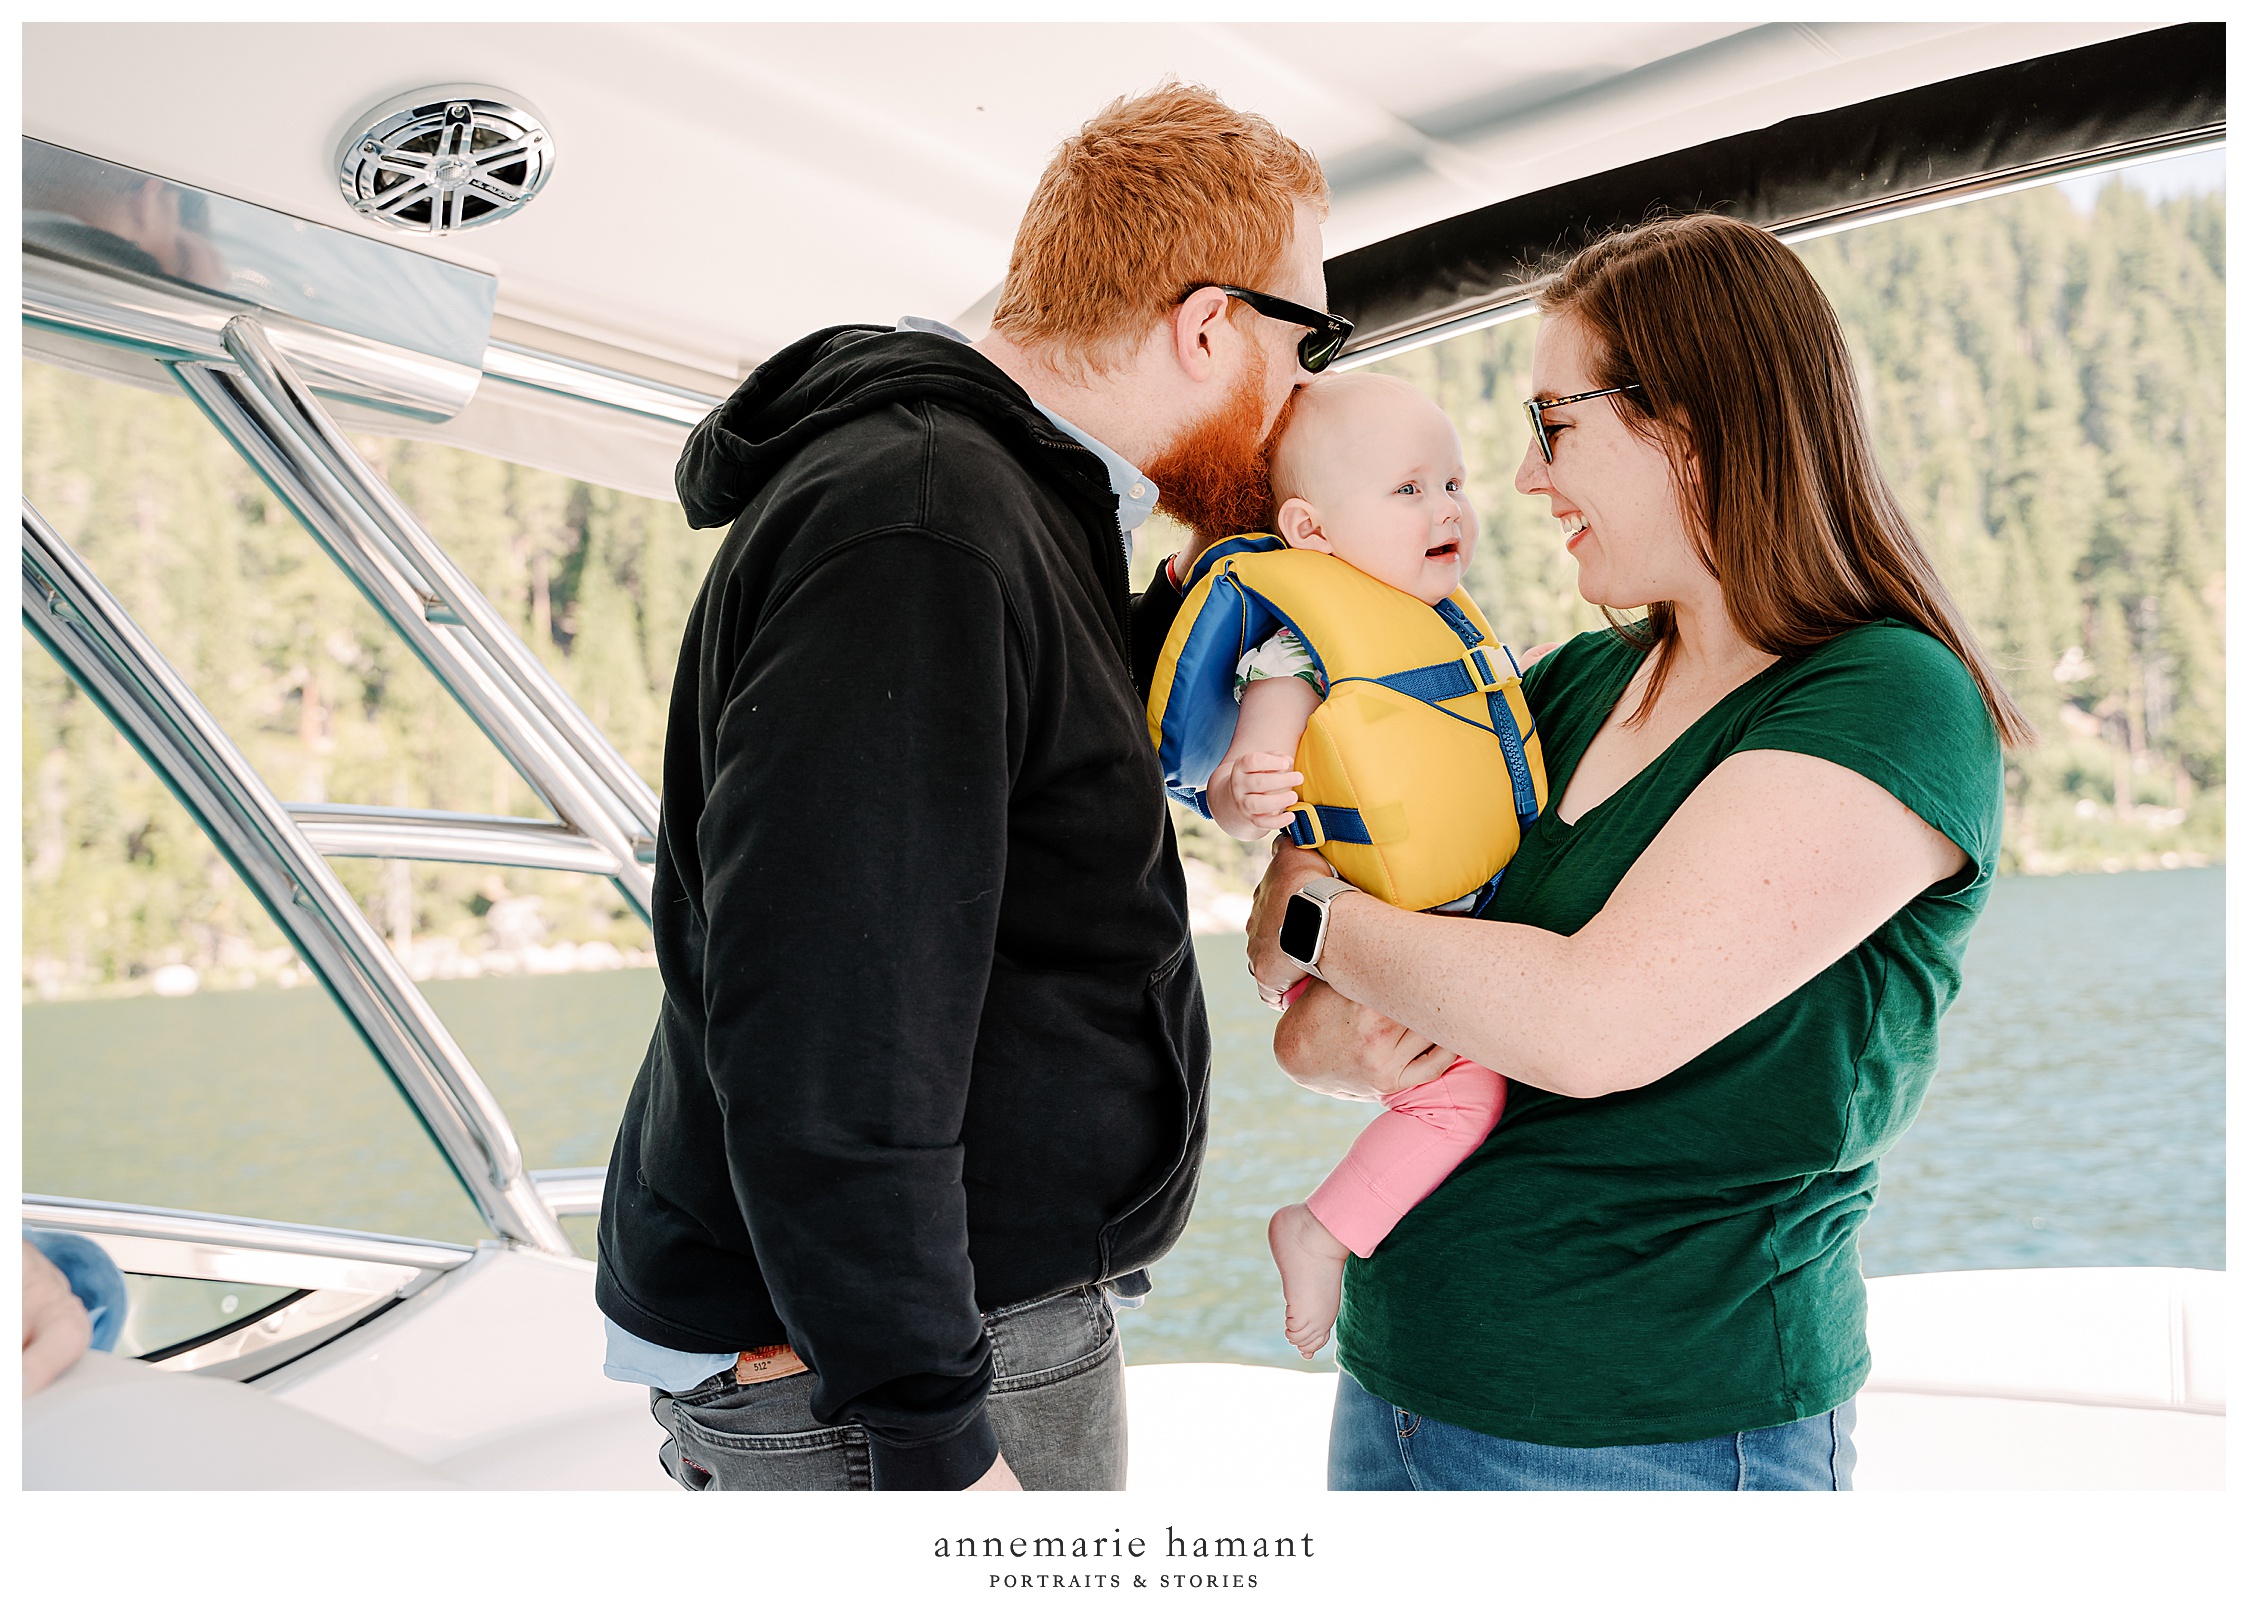  Documentary family photography on Lake Tahoe captures your family vacation and lake life. AnneMarie Hamant is an award winning photographer who travels to document her client’s most important memories. 